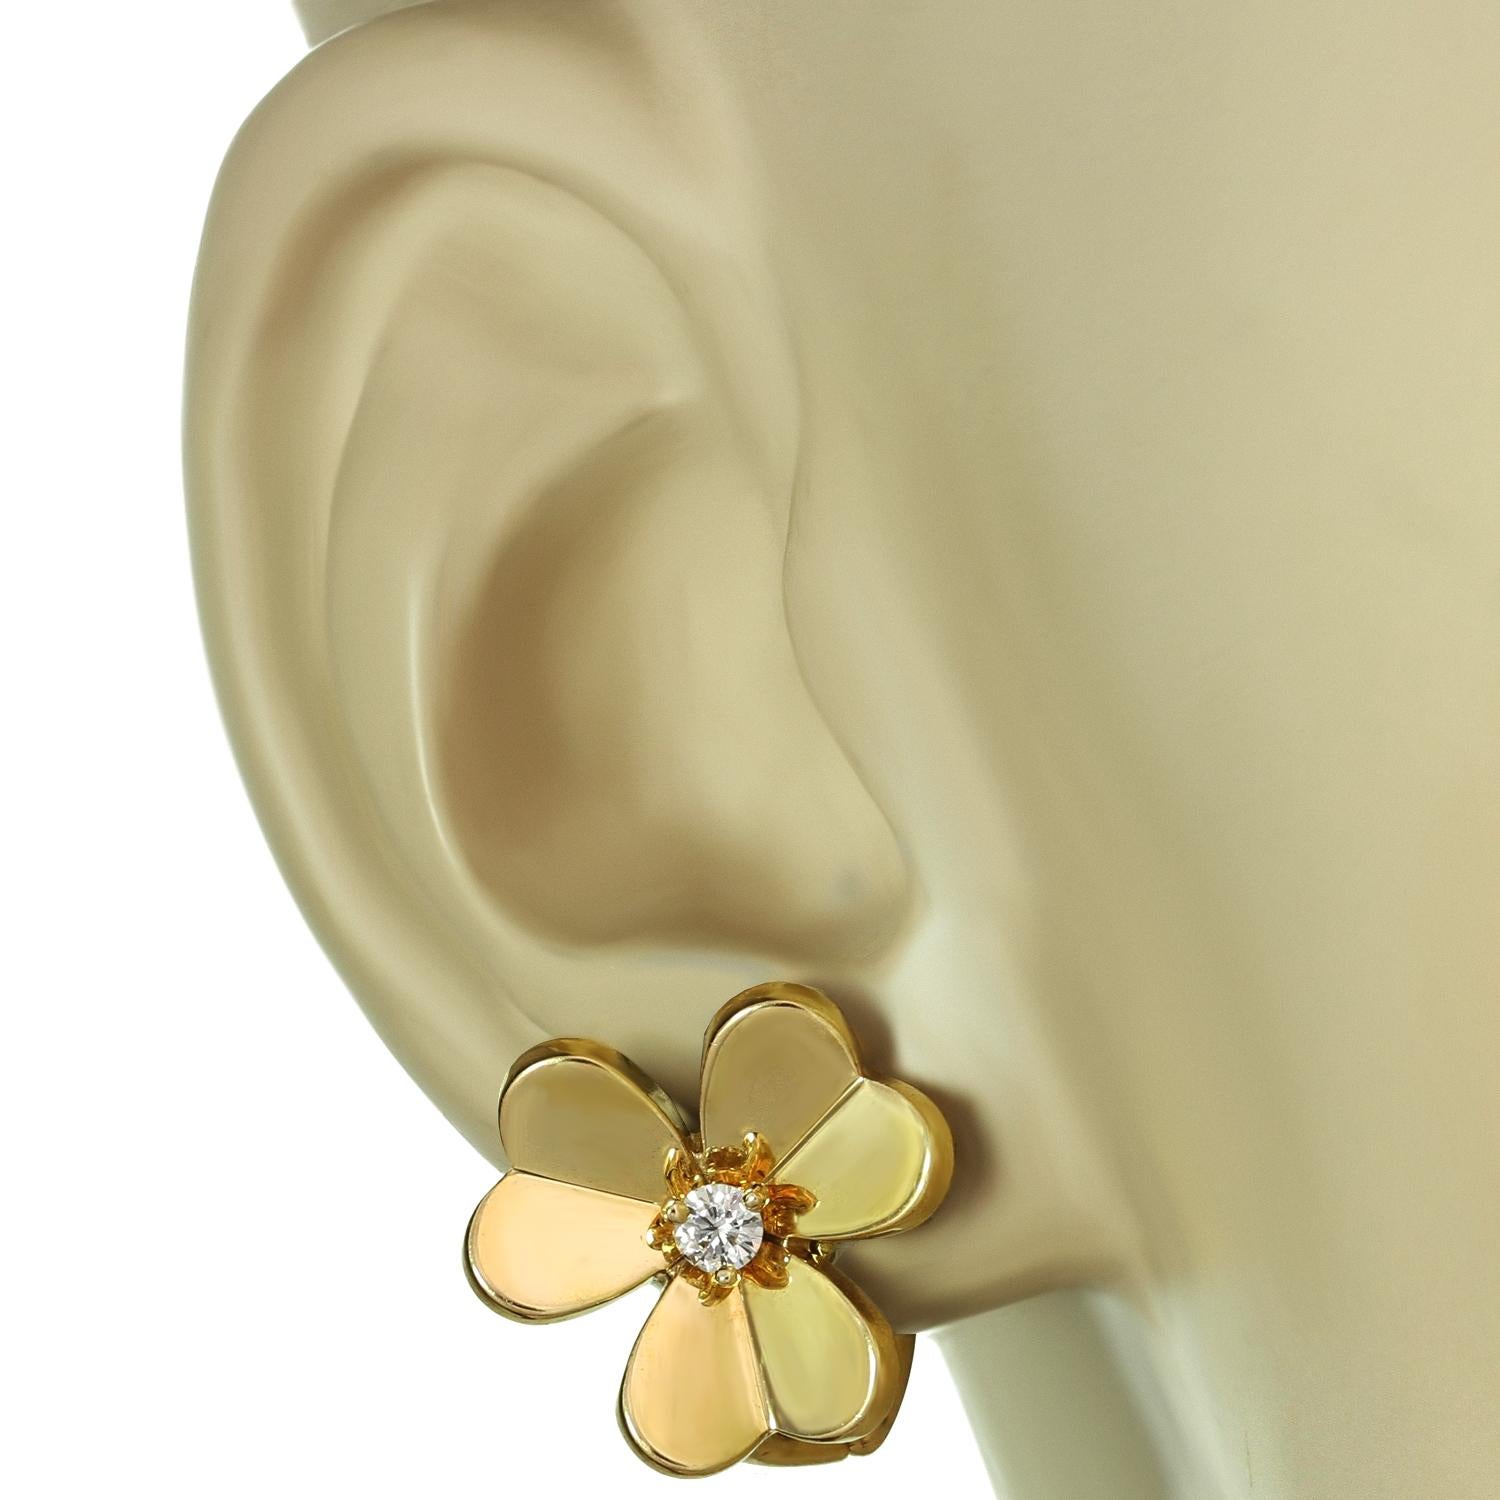 This elegant Van Cleef and Arpels clip-on earrings from the iconic Frivole collection features a flower design crafted in 18k yellow gold and set with 2 round brilliant D-E-F VVS1-VVS2 diamonds weighing an estimated 0.17 carats. This is the small